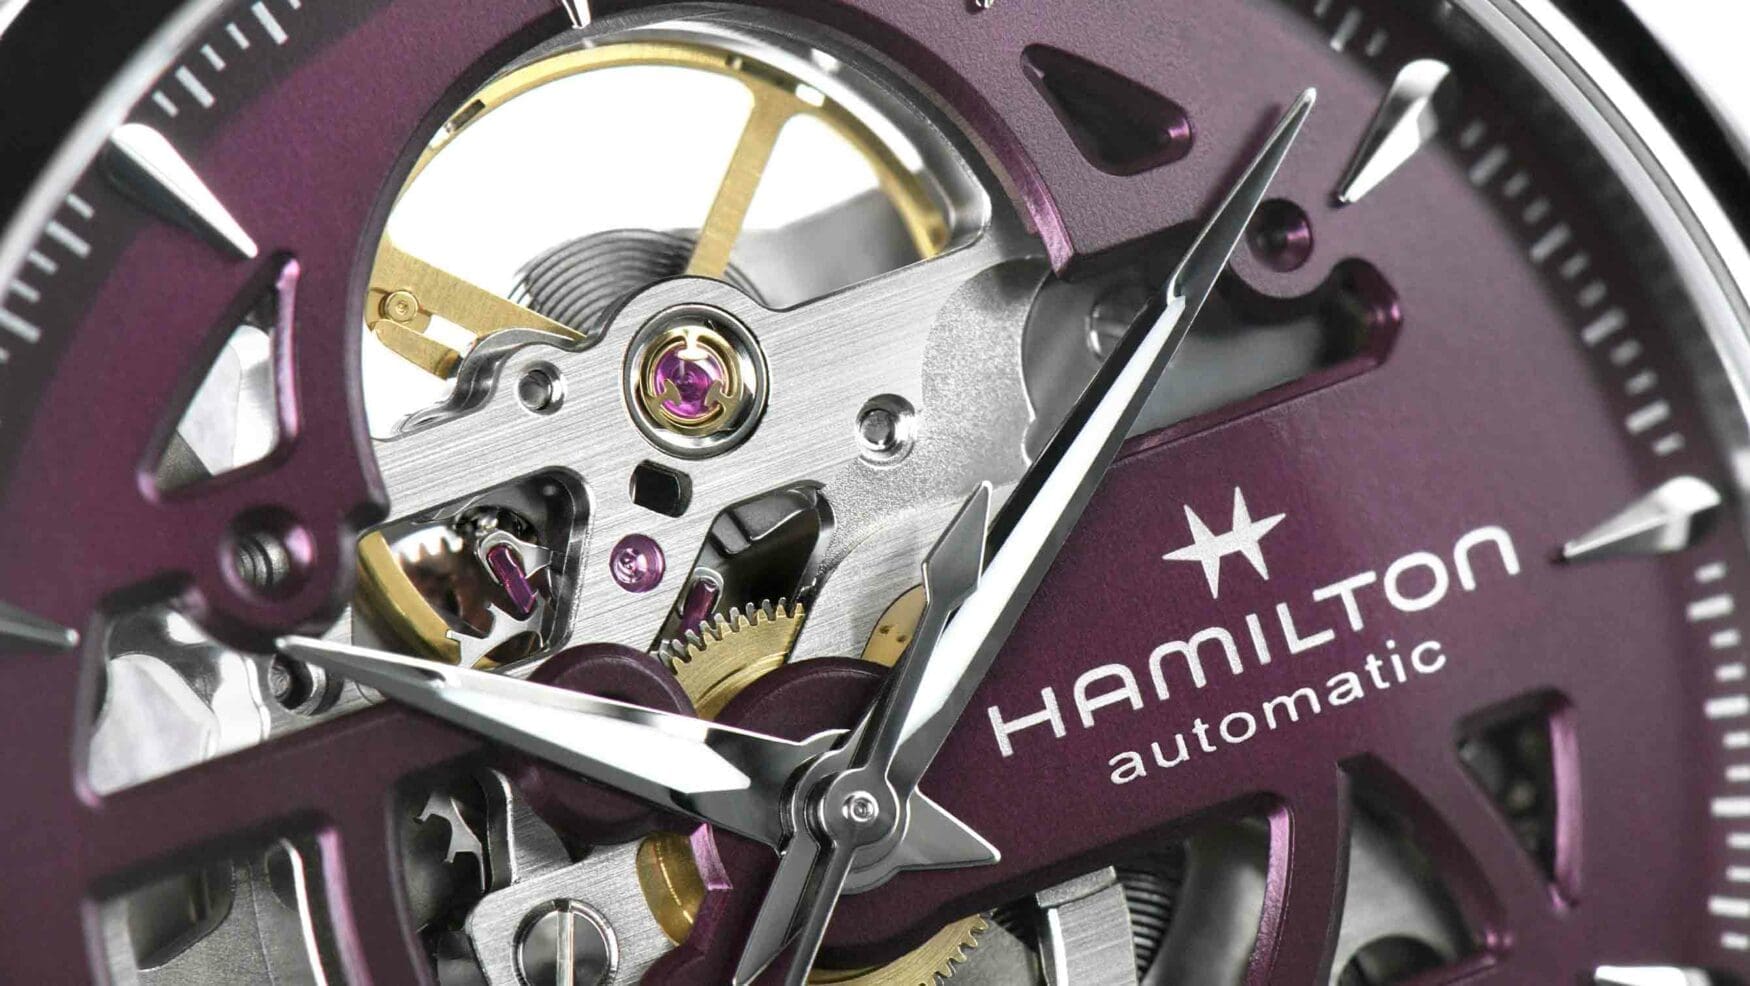 The new Hamilton Jazzmaster Skeleton shows off its beating heart better than before